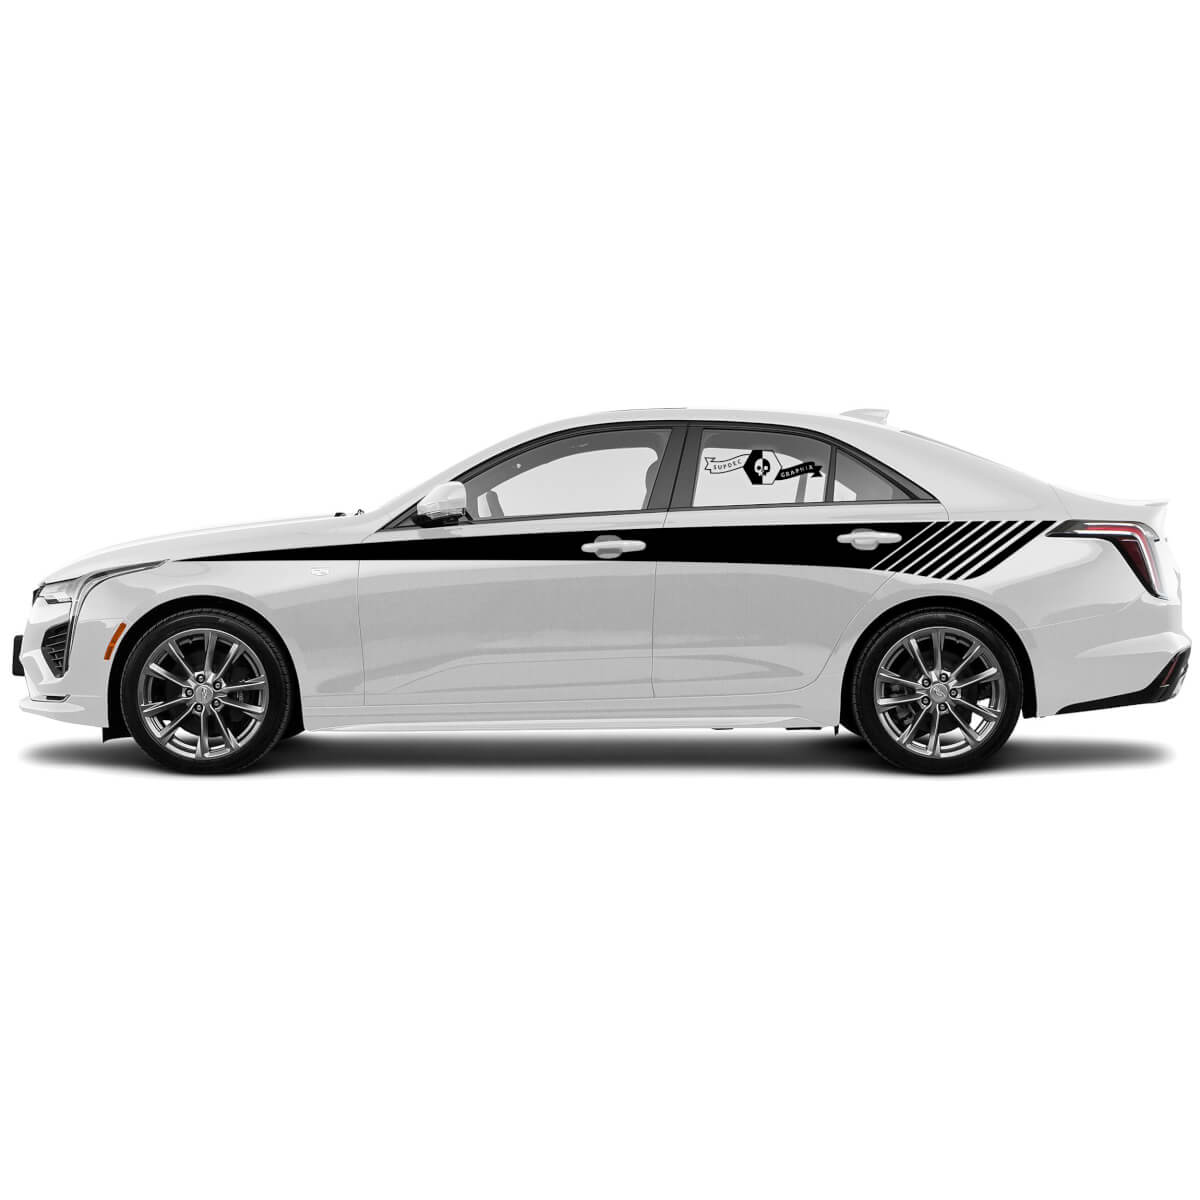 2 New Decal Sticker Stylish Doors Up Accent Lines Wrap Vinyl Decal für Cadillac CT4
